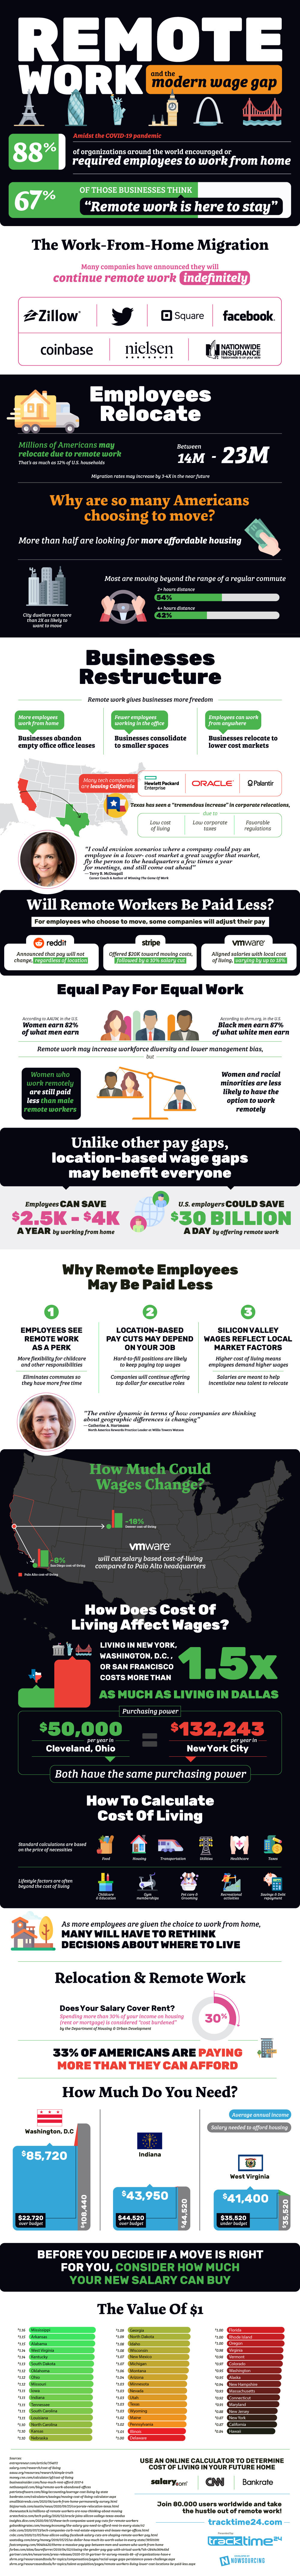 Infographic: Are remote work apps contributing to the newest wage gap?